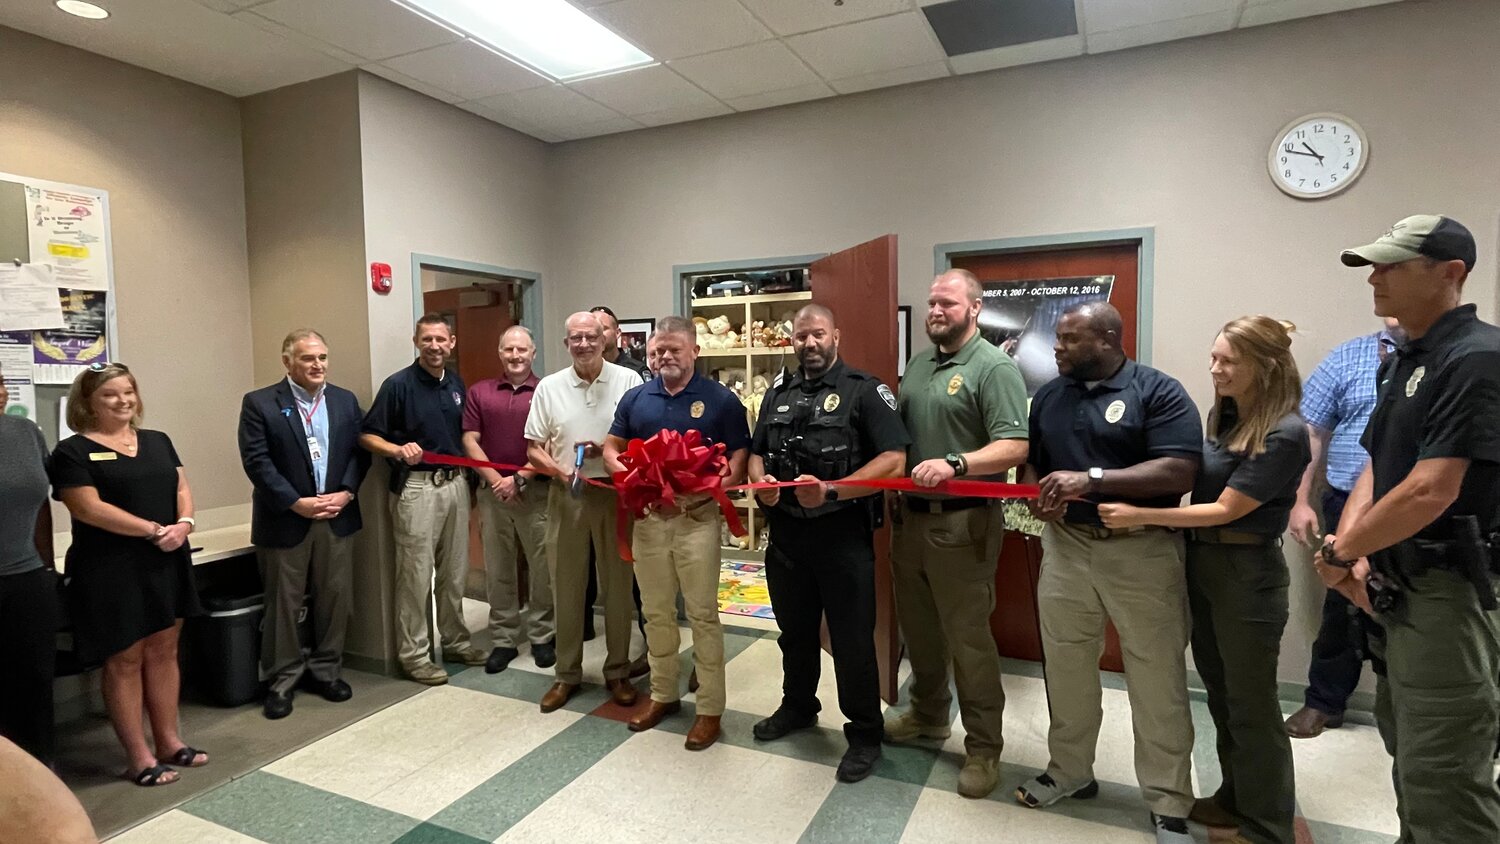 The City of Ridgeland cut the ribbon for the Ridgeland Police Department's new Canon's Closet, located in the RPD roll call room. Pictured, from left: Allison Deweese from Holmes Community College, John Dorsa from State Farm, Lt. Eddy Addison (Patrol Commander), Lt. Brett Bertucci (CID Commander), Mayor Gene McGee, Sgt. Ryan Jungers, Chief Brian Myers, Officer Scott Young, Officer Stephen Webb, Assistant Chief Stephen Webb,  Lt. Sara Perkins (Support Services Commander), and K9 Officer Ben Johnson.